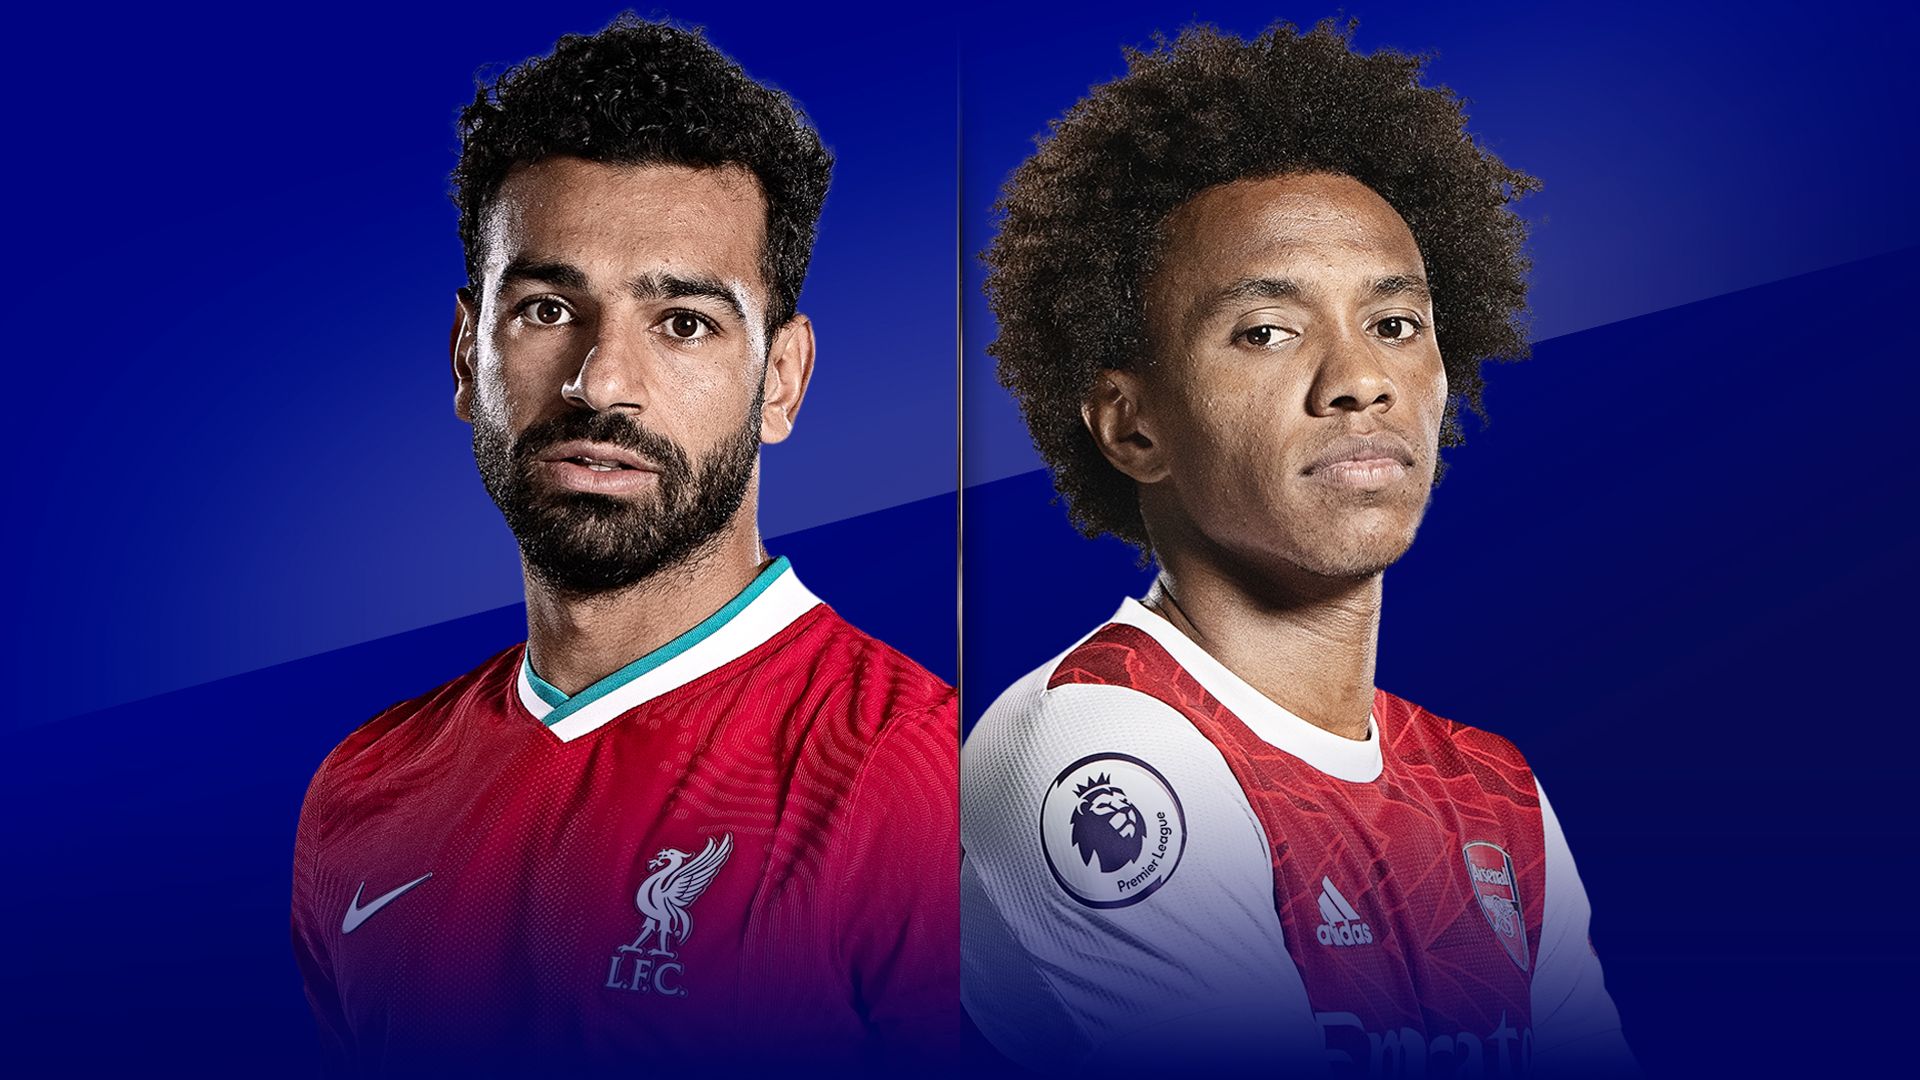 Carabao Cup: Liverpool vs Arsenal, Spurs vs Chelsea live on Sky